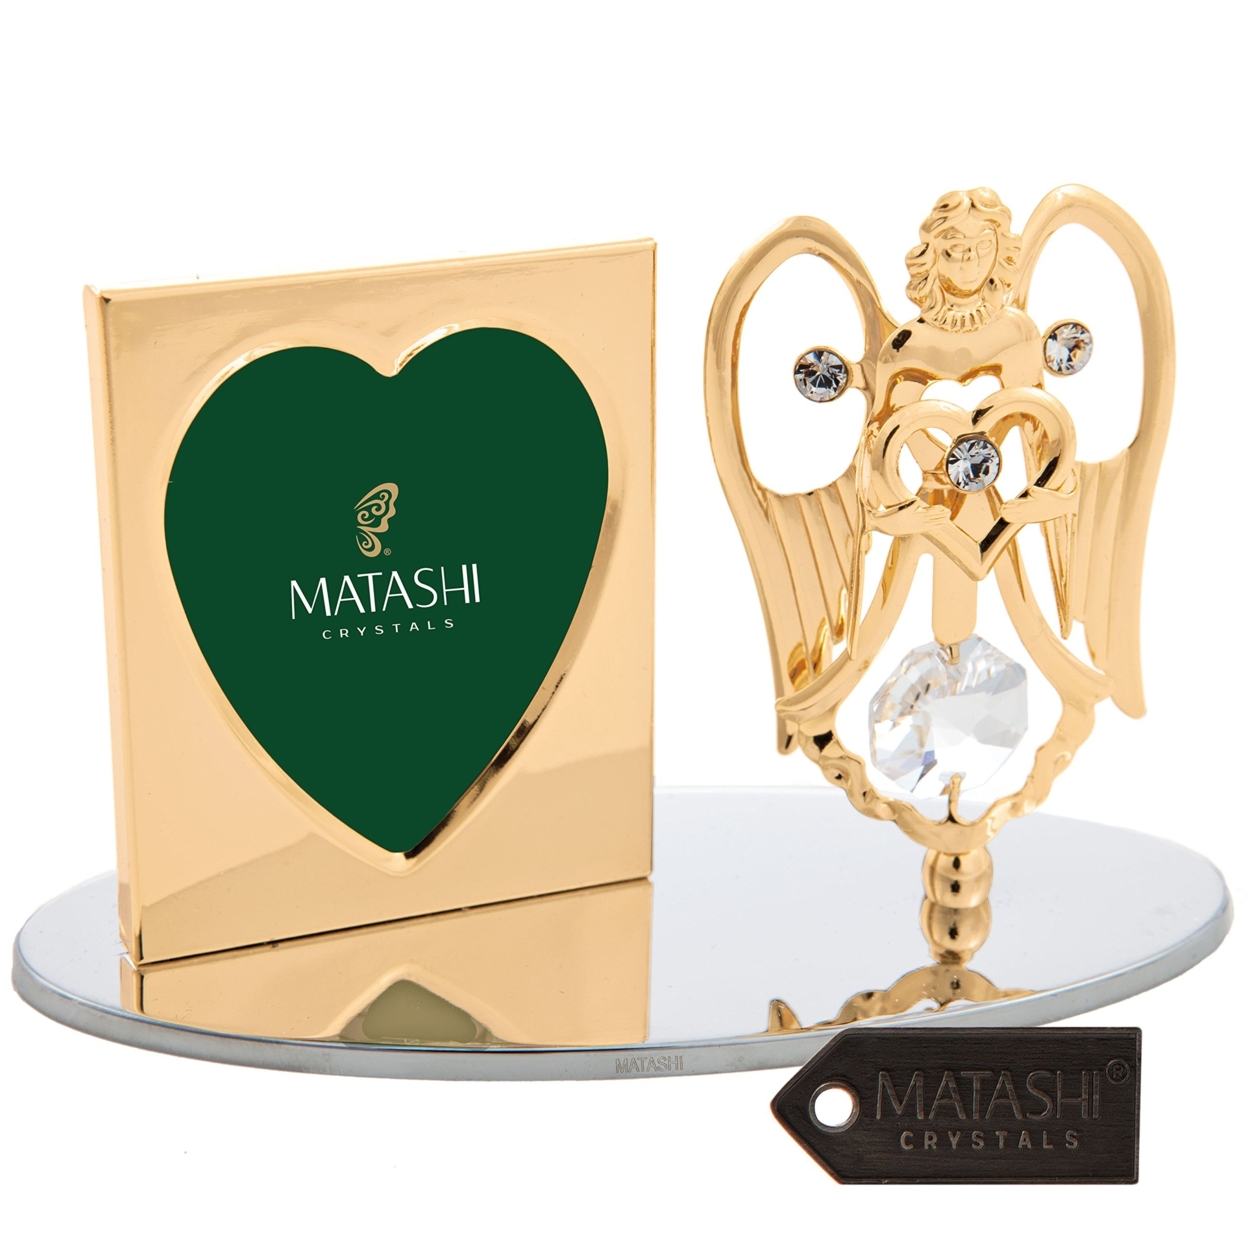 Matashi 24K Gold Plated Angel Holding A Heart Picture Frame Made With Crystals Gift For Christmas Mother's Day Birthday Valentine's Day